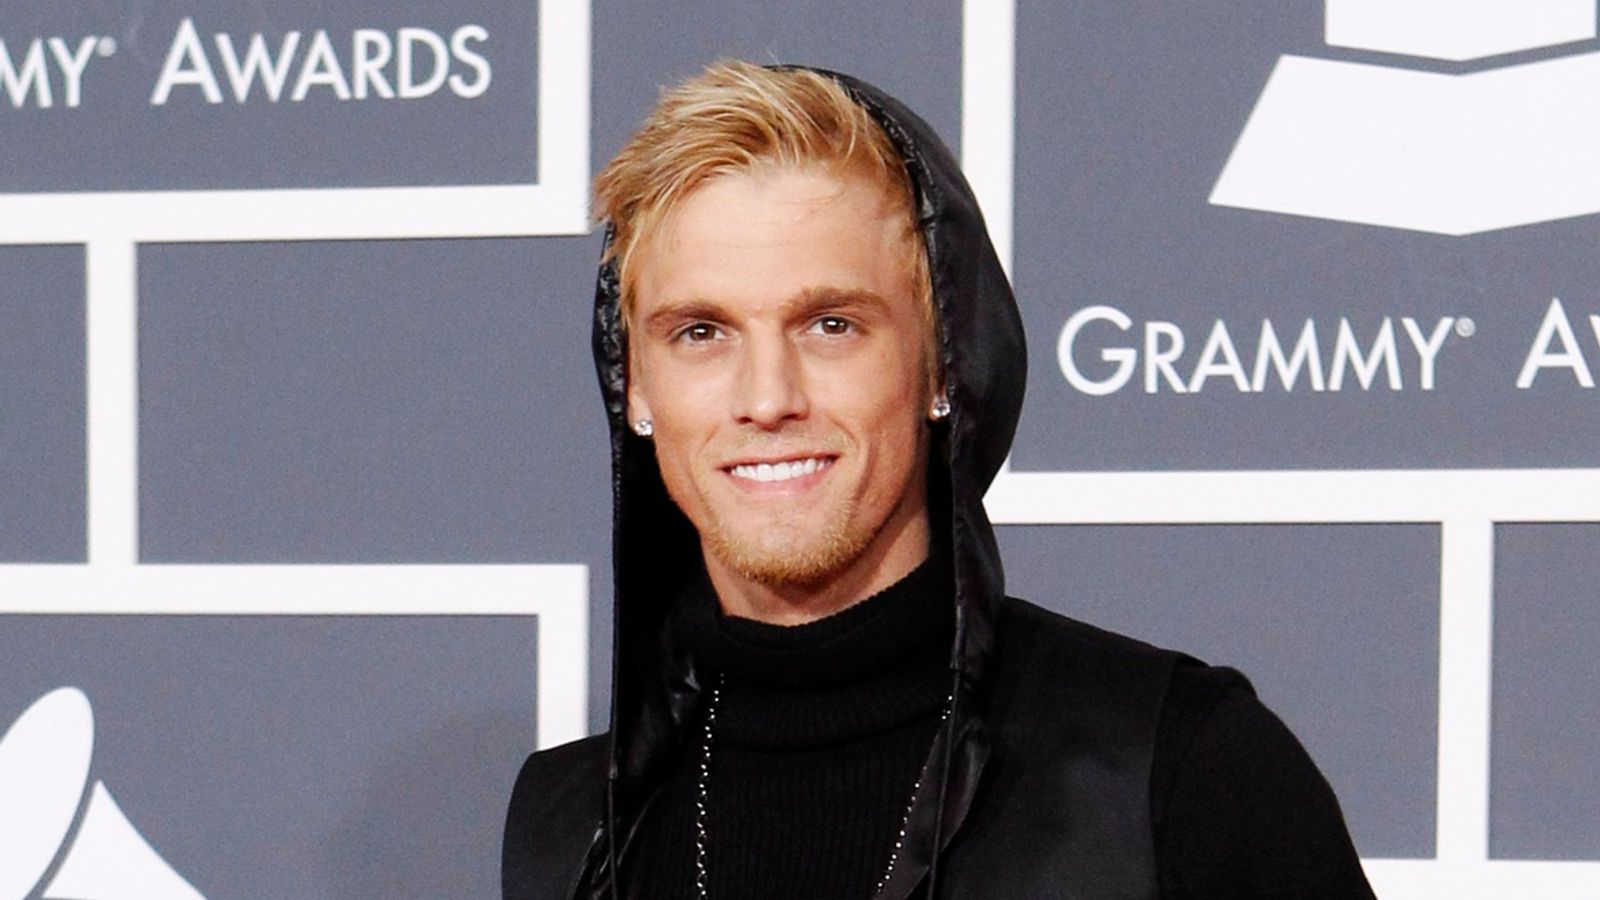 Aaron Carter: Singer and brother of Backstreet Boys' Nick Carter dies aged 34